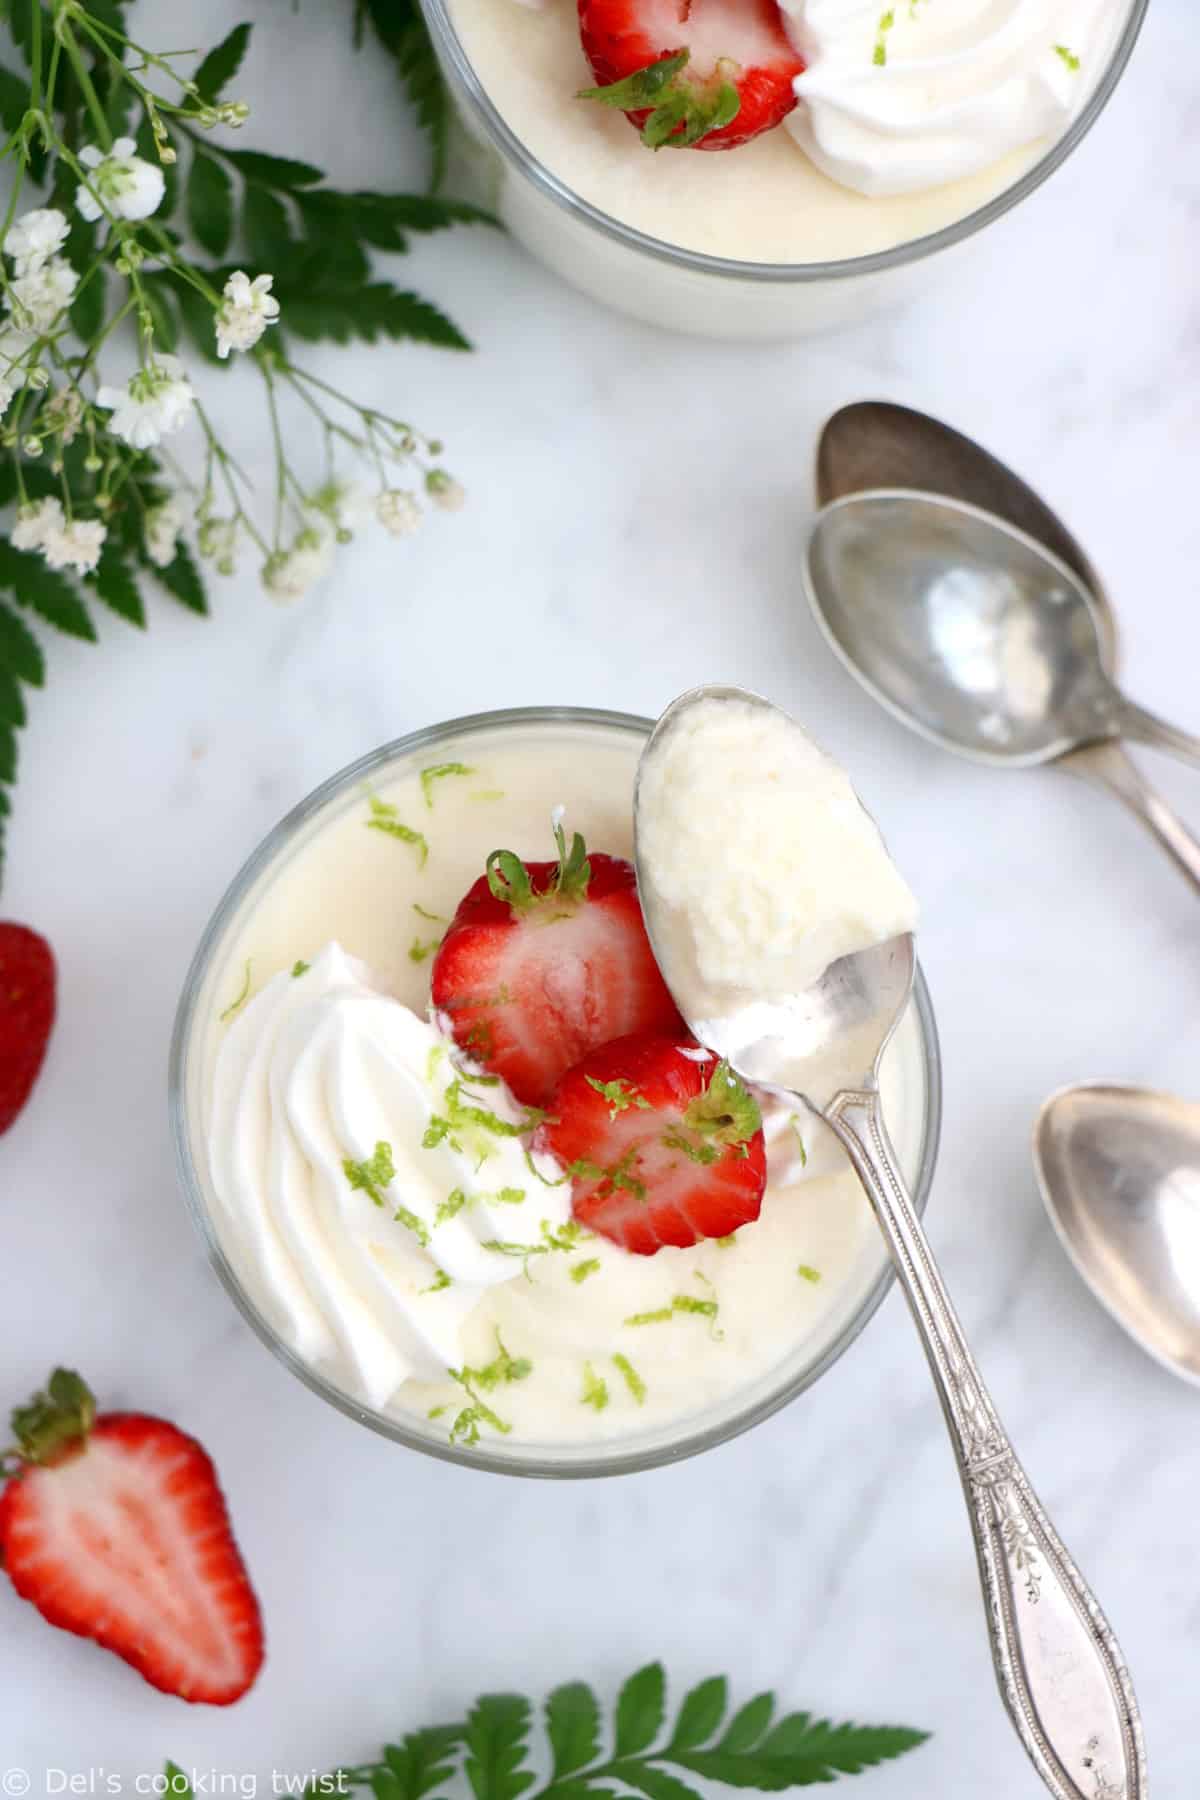 This simple 3-ingredient white chocolate mousse is luxury. No weird ingredient, no gelatin or agar-agar, it makes for an elegant white chocolate dessert with a silky-smooth texture.